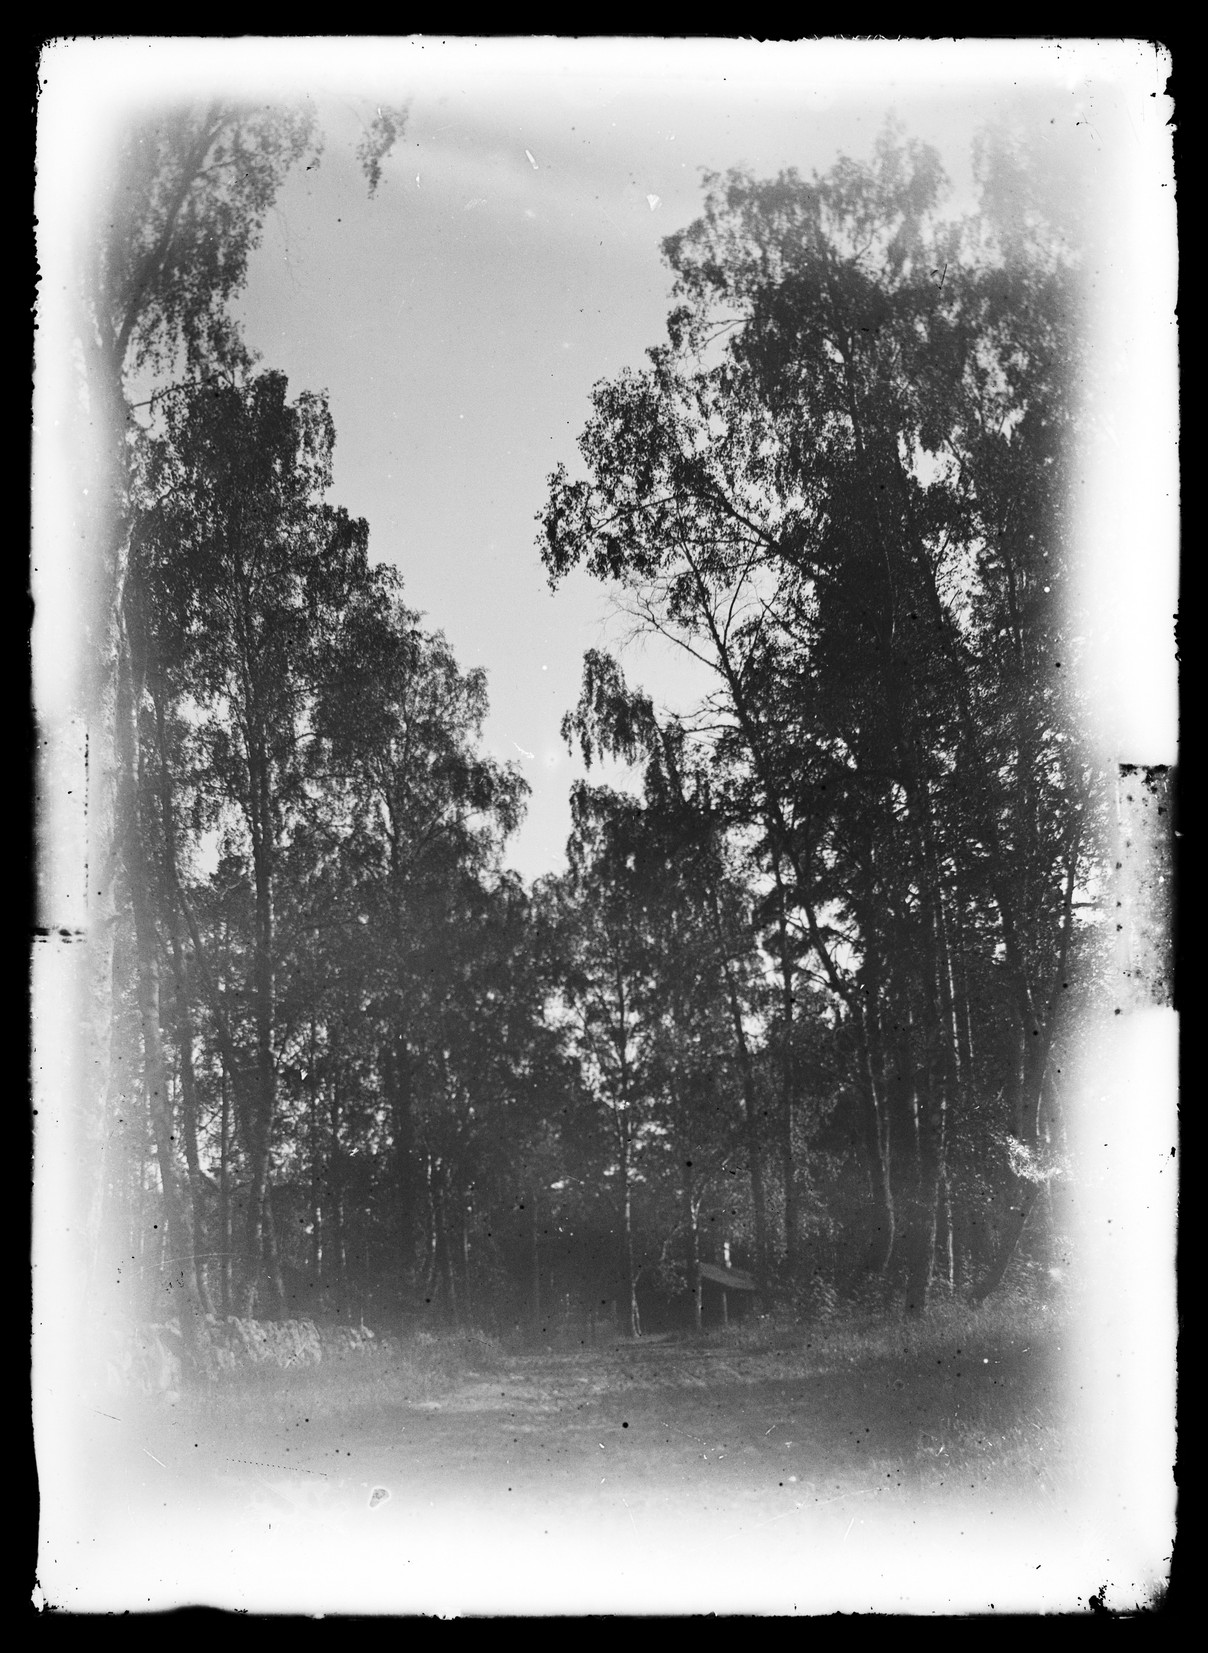 black and white image of trees and a bench